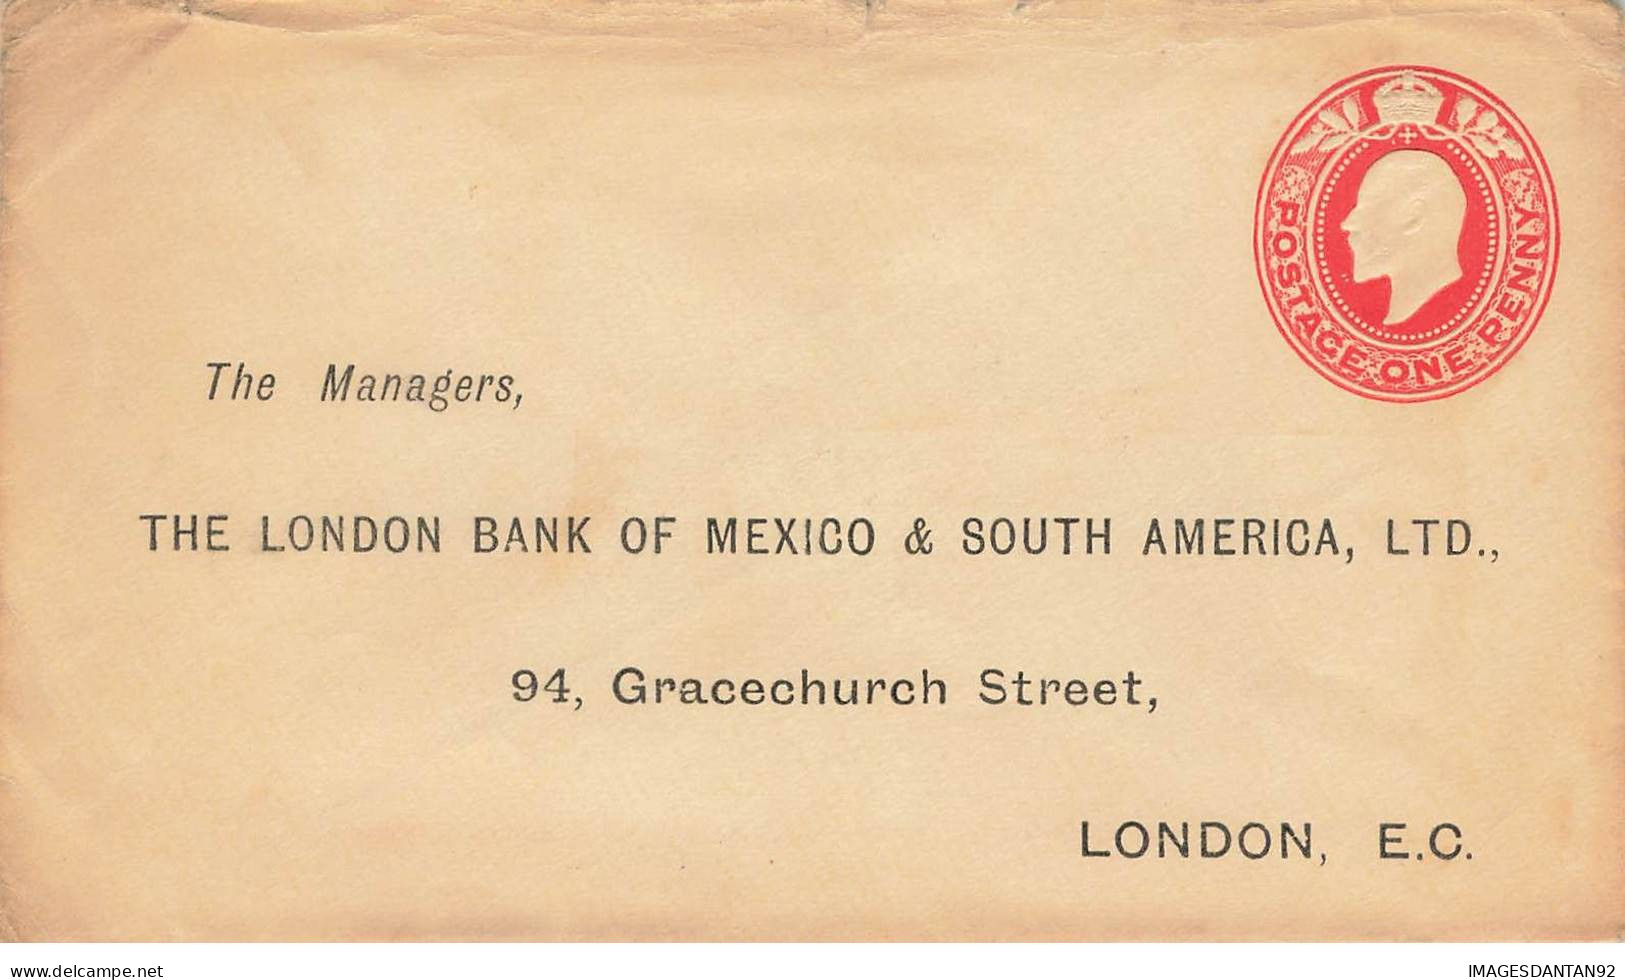 ROYAUME UNI ENGLAND #32806 ENTIER REPIQUAGE THE LONDON BANK OF MEXICO AND SOUTH AMERICA - Material Postal